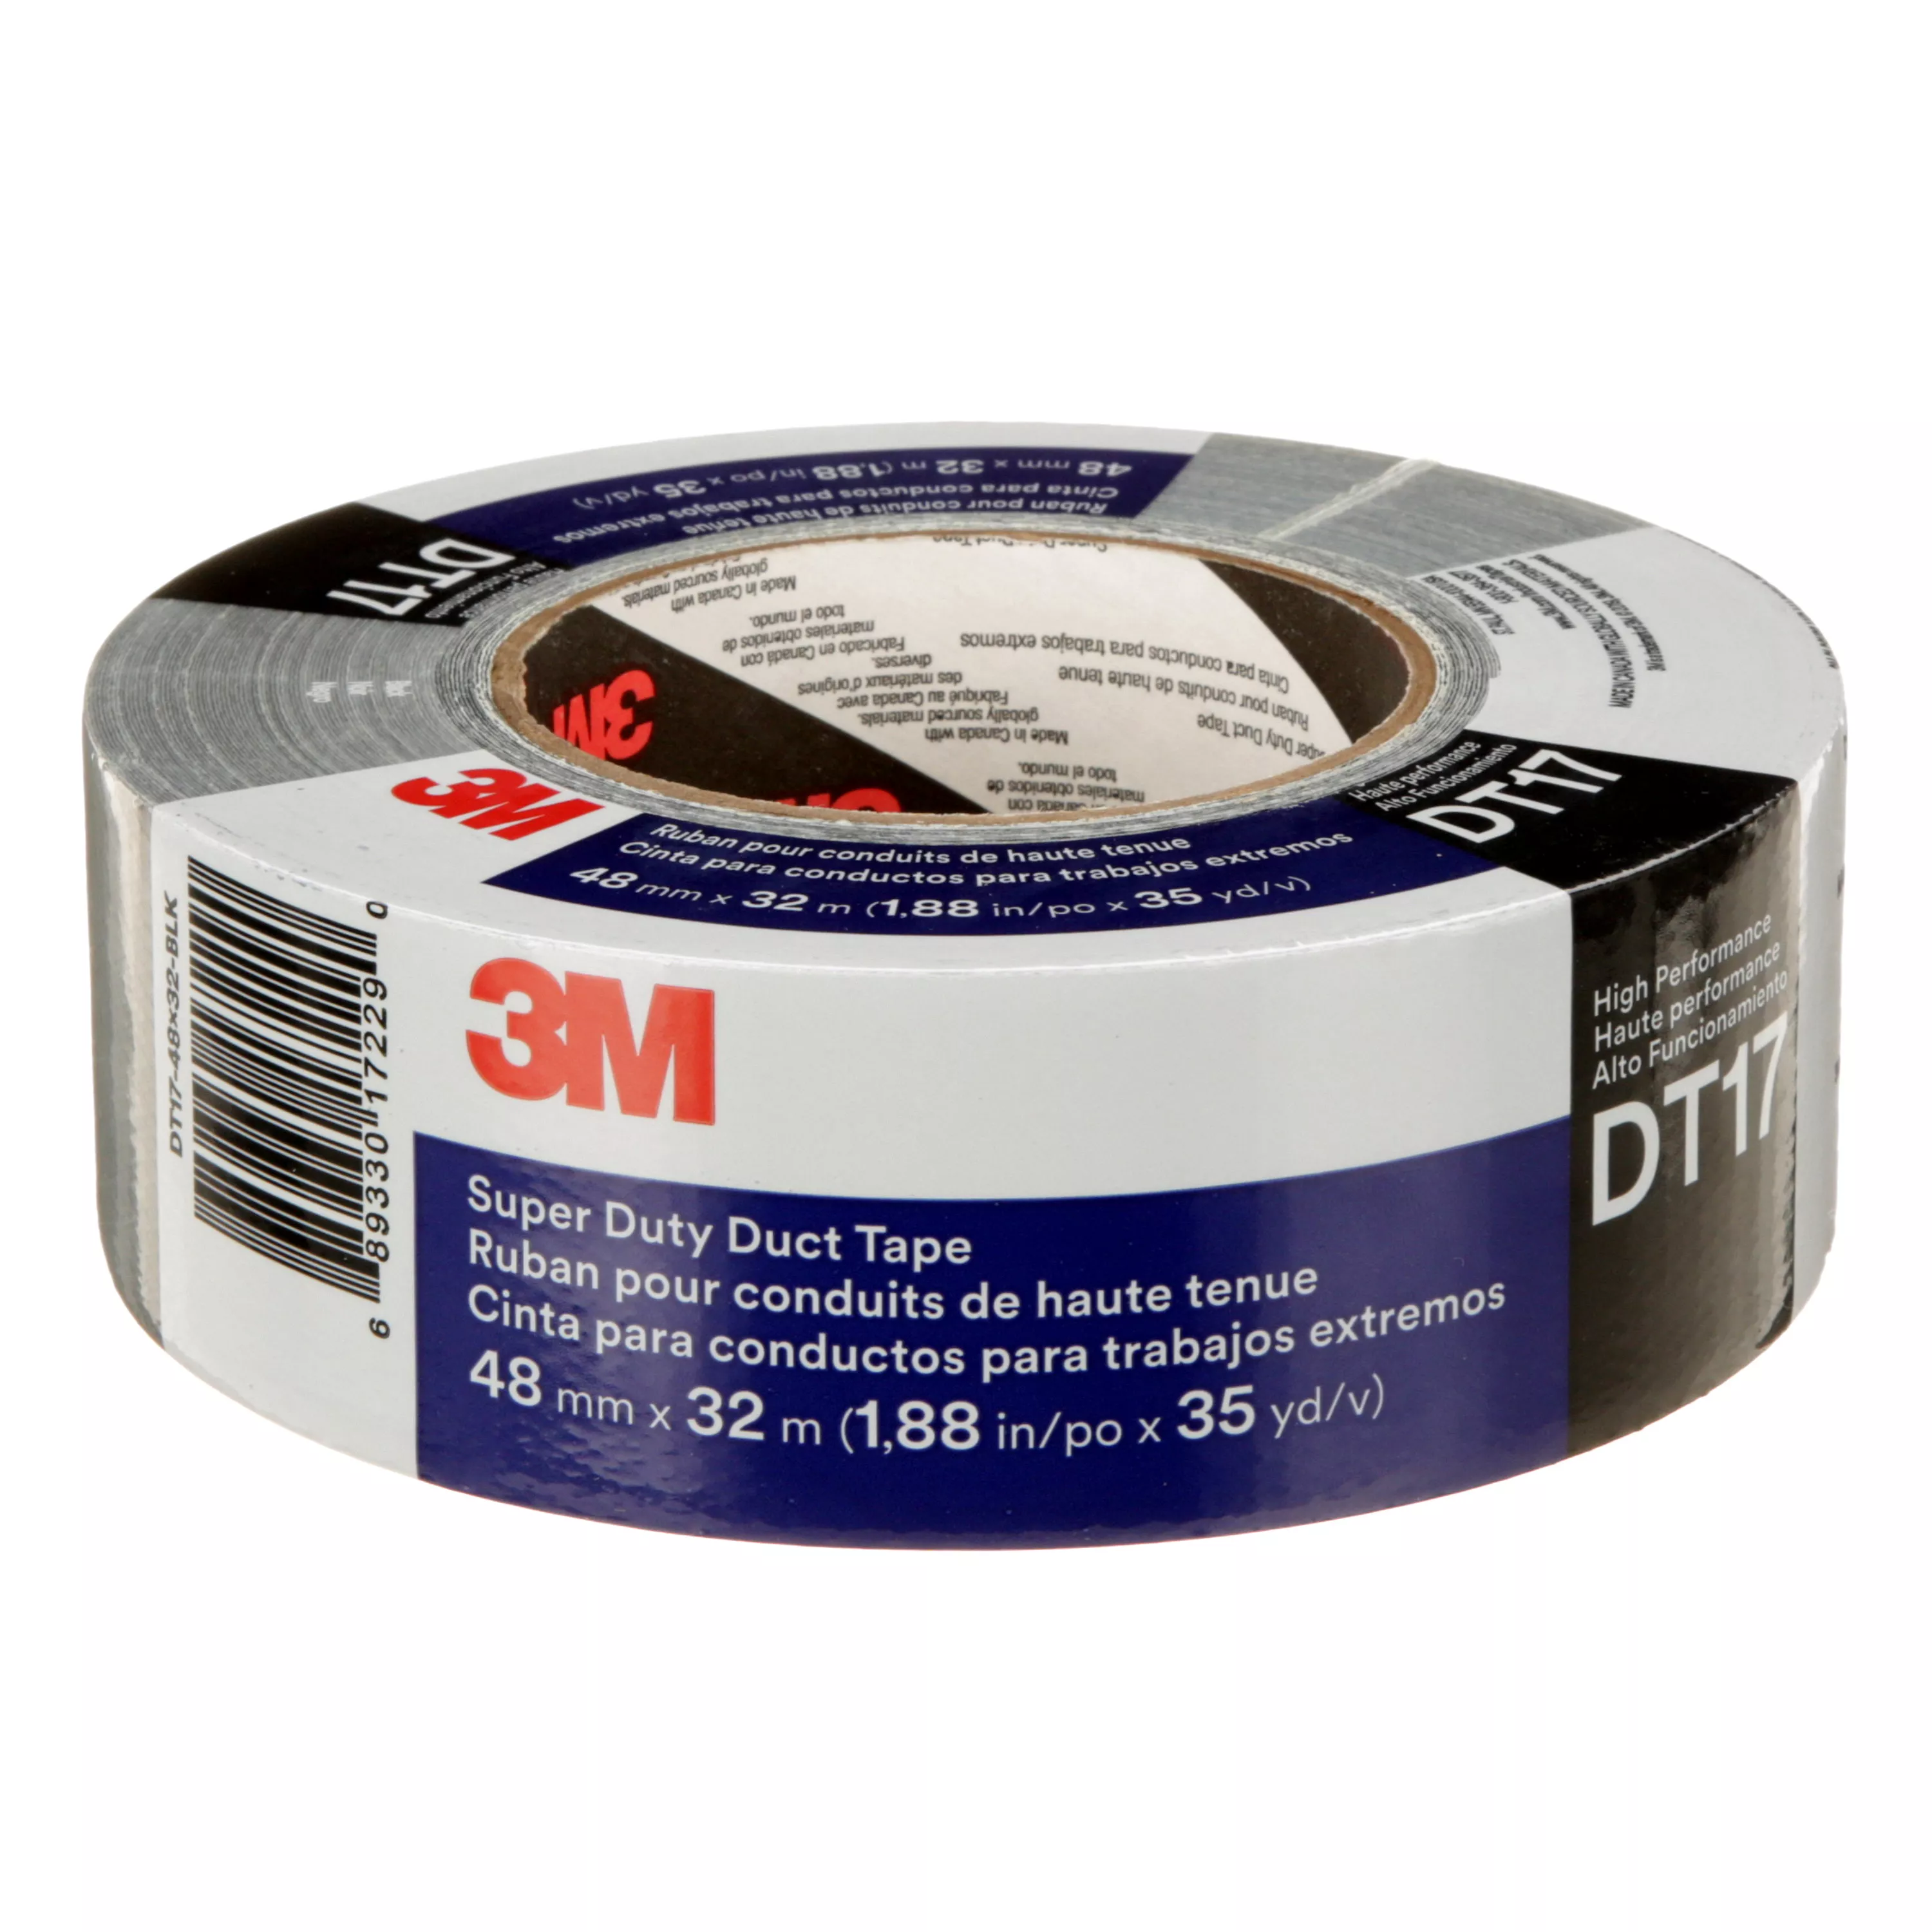 3M™ Super Duty Duct Tape DT17, Black, 48 mm x 32 m, 17 mil, 24
Roll/Case, Individually Wrapped Conveniently Packaged